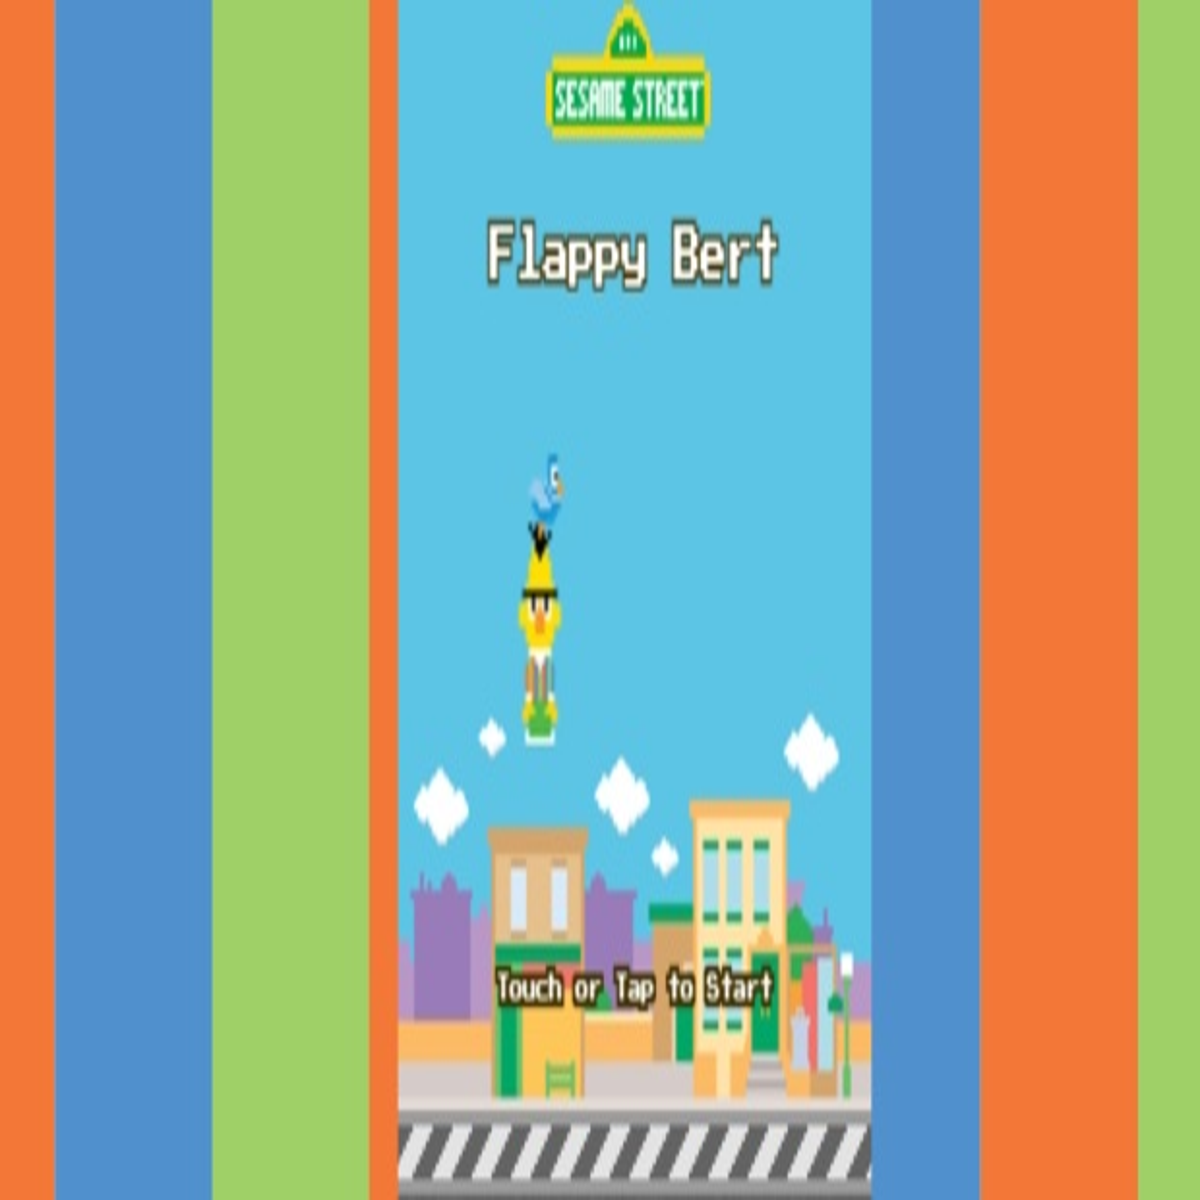 Release] Flappy Bird DS   - The Independent Video Game Community